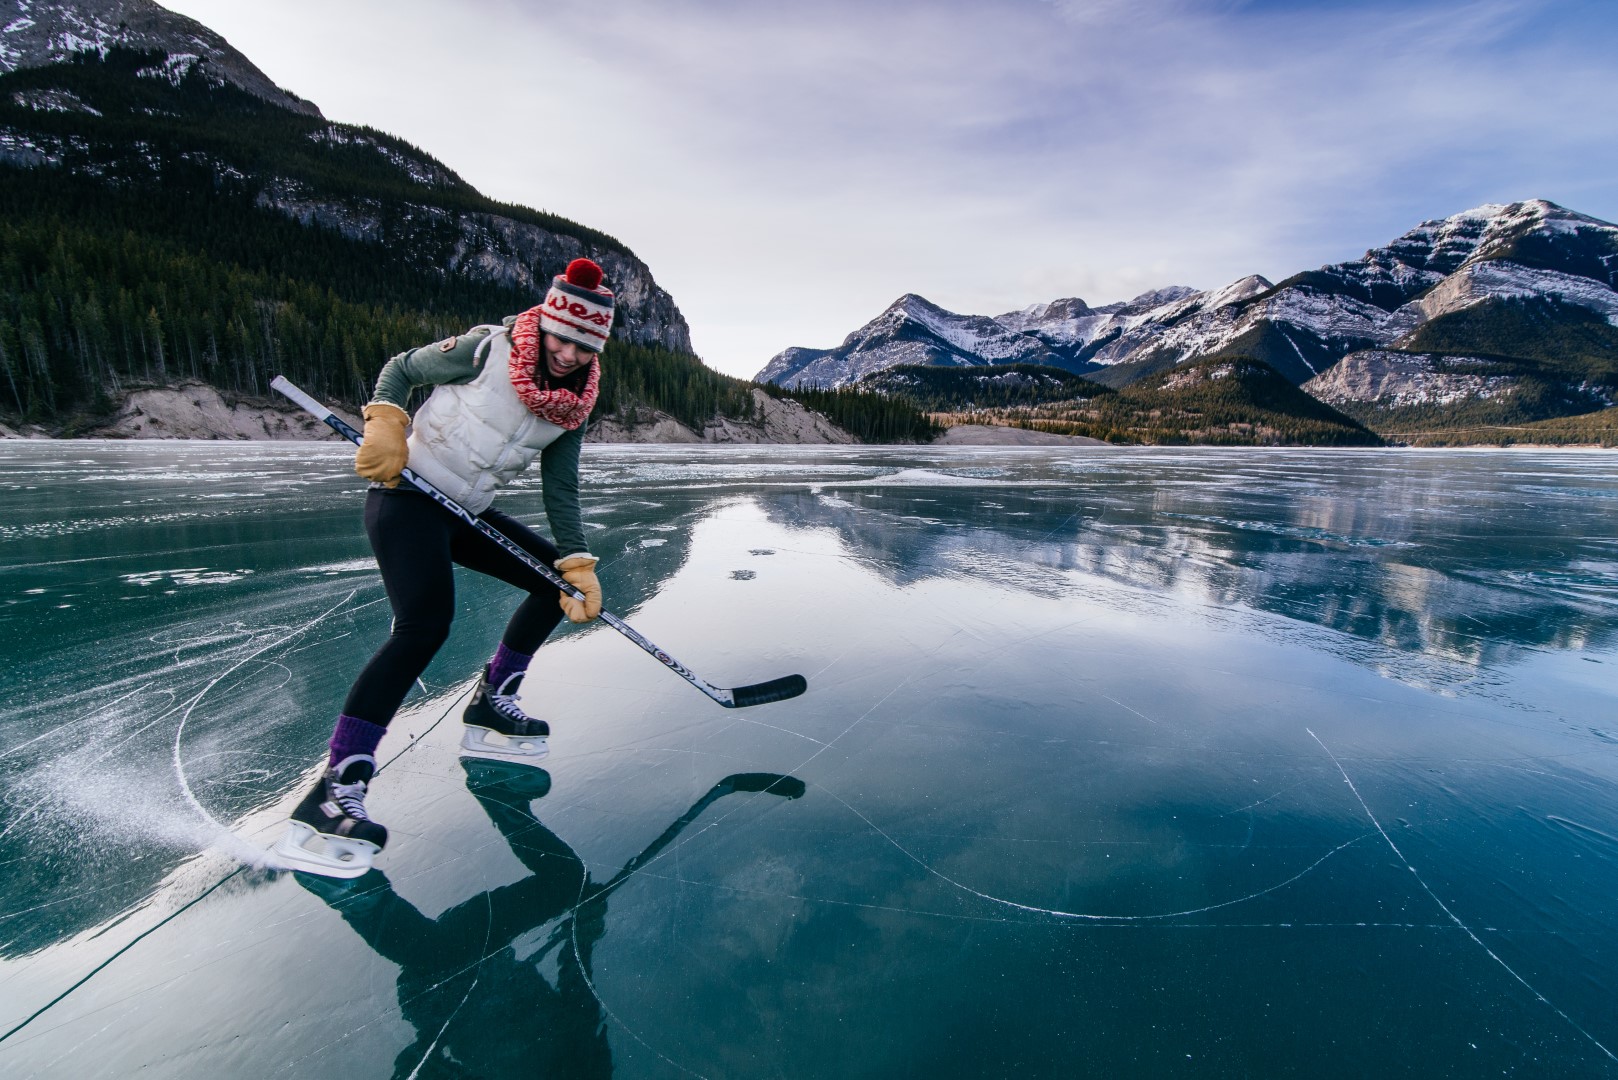 Gliding on the Frozen Lakes in the Heart of the Rockies